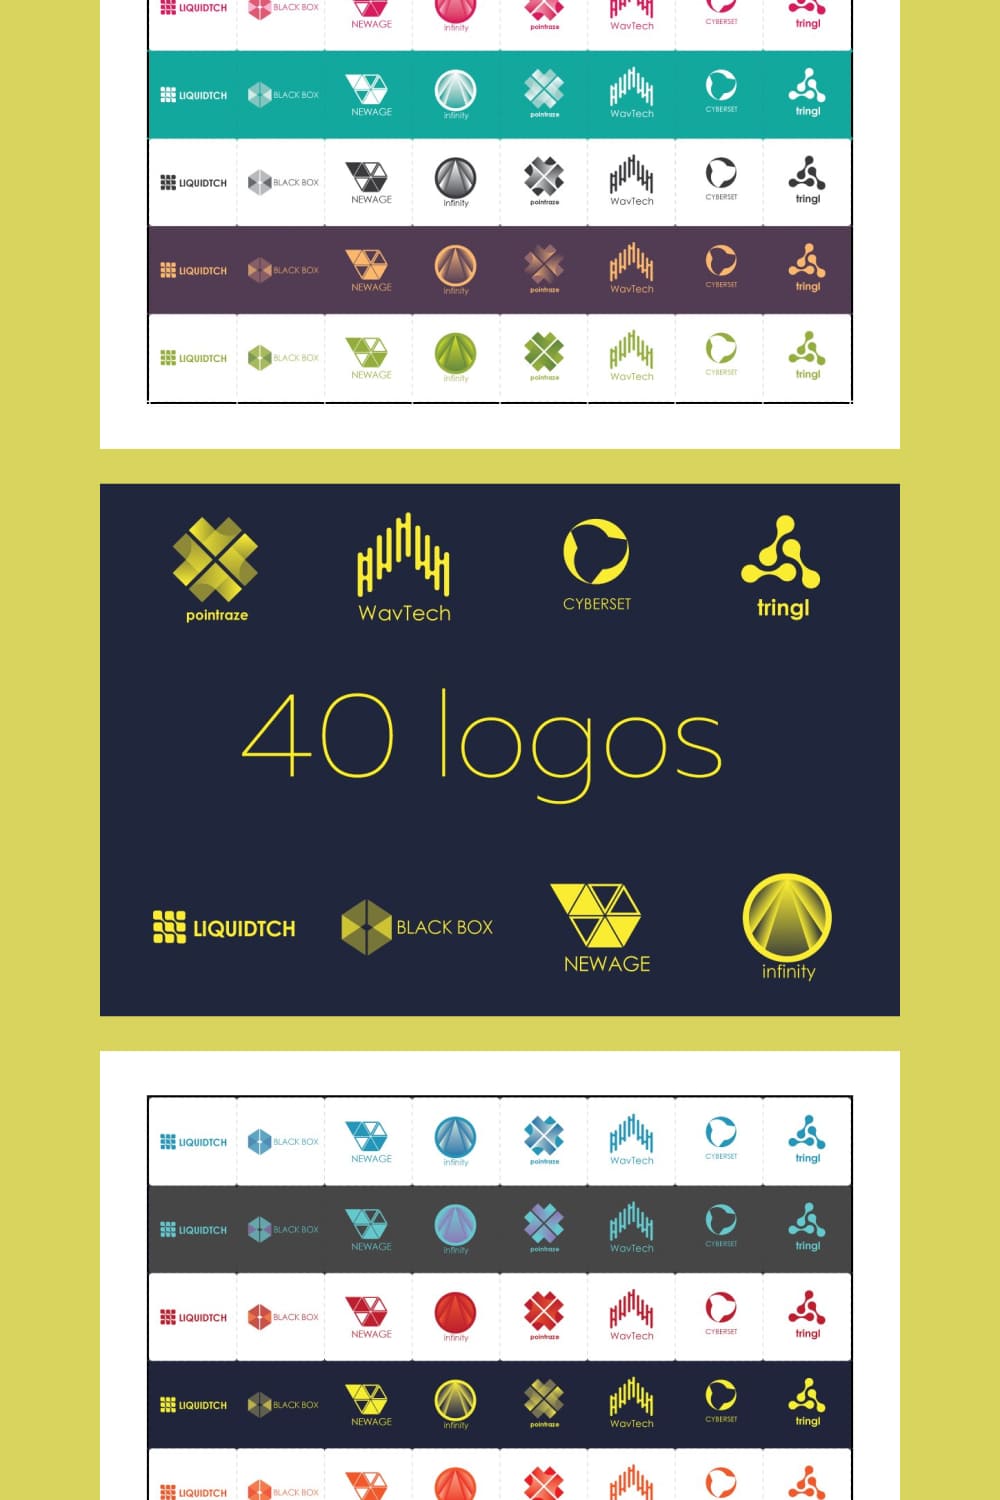 These logos would be perfect for your website, business card and so much more.